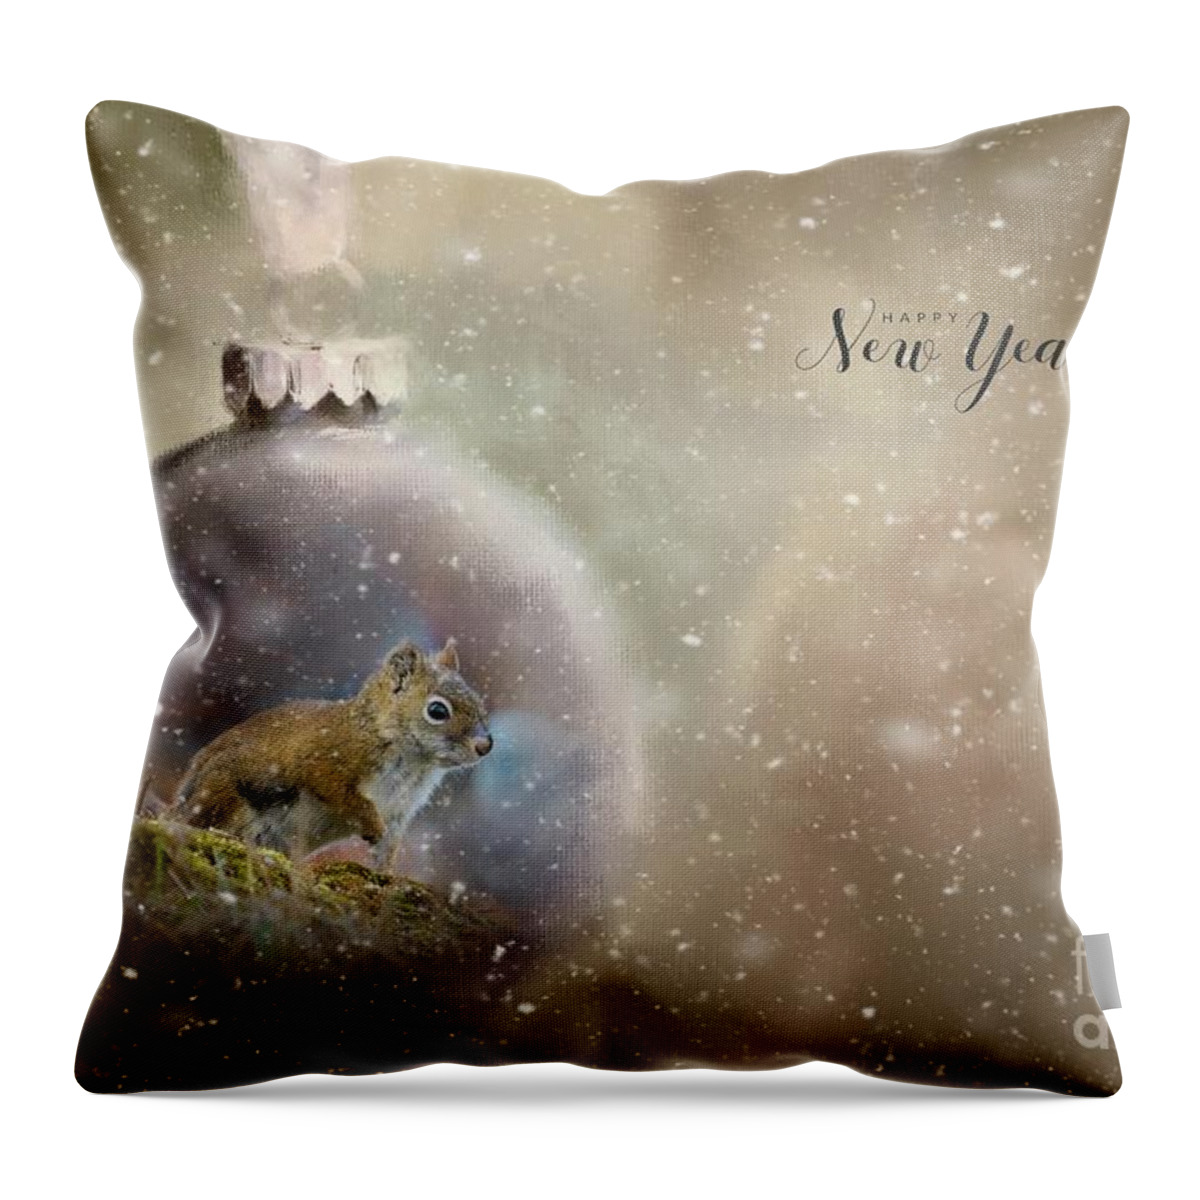 Red Squirrel Throw Pillow featuring the photograph Happy New Year Greeting Card by Eva Lechner